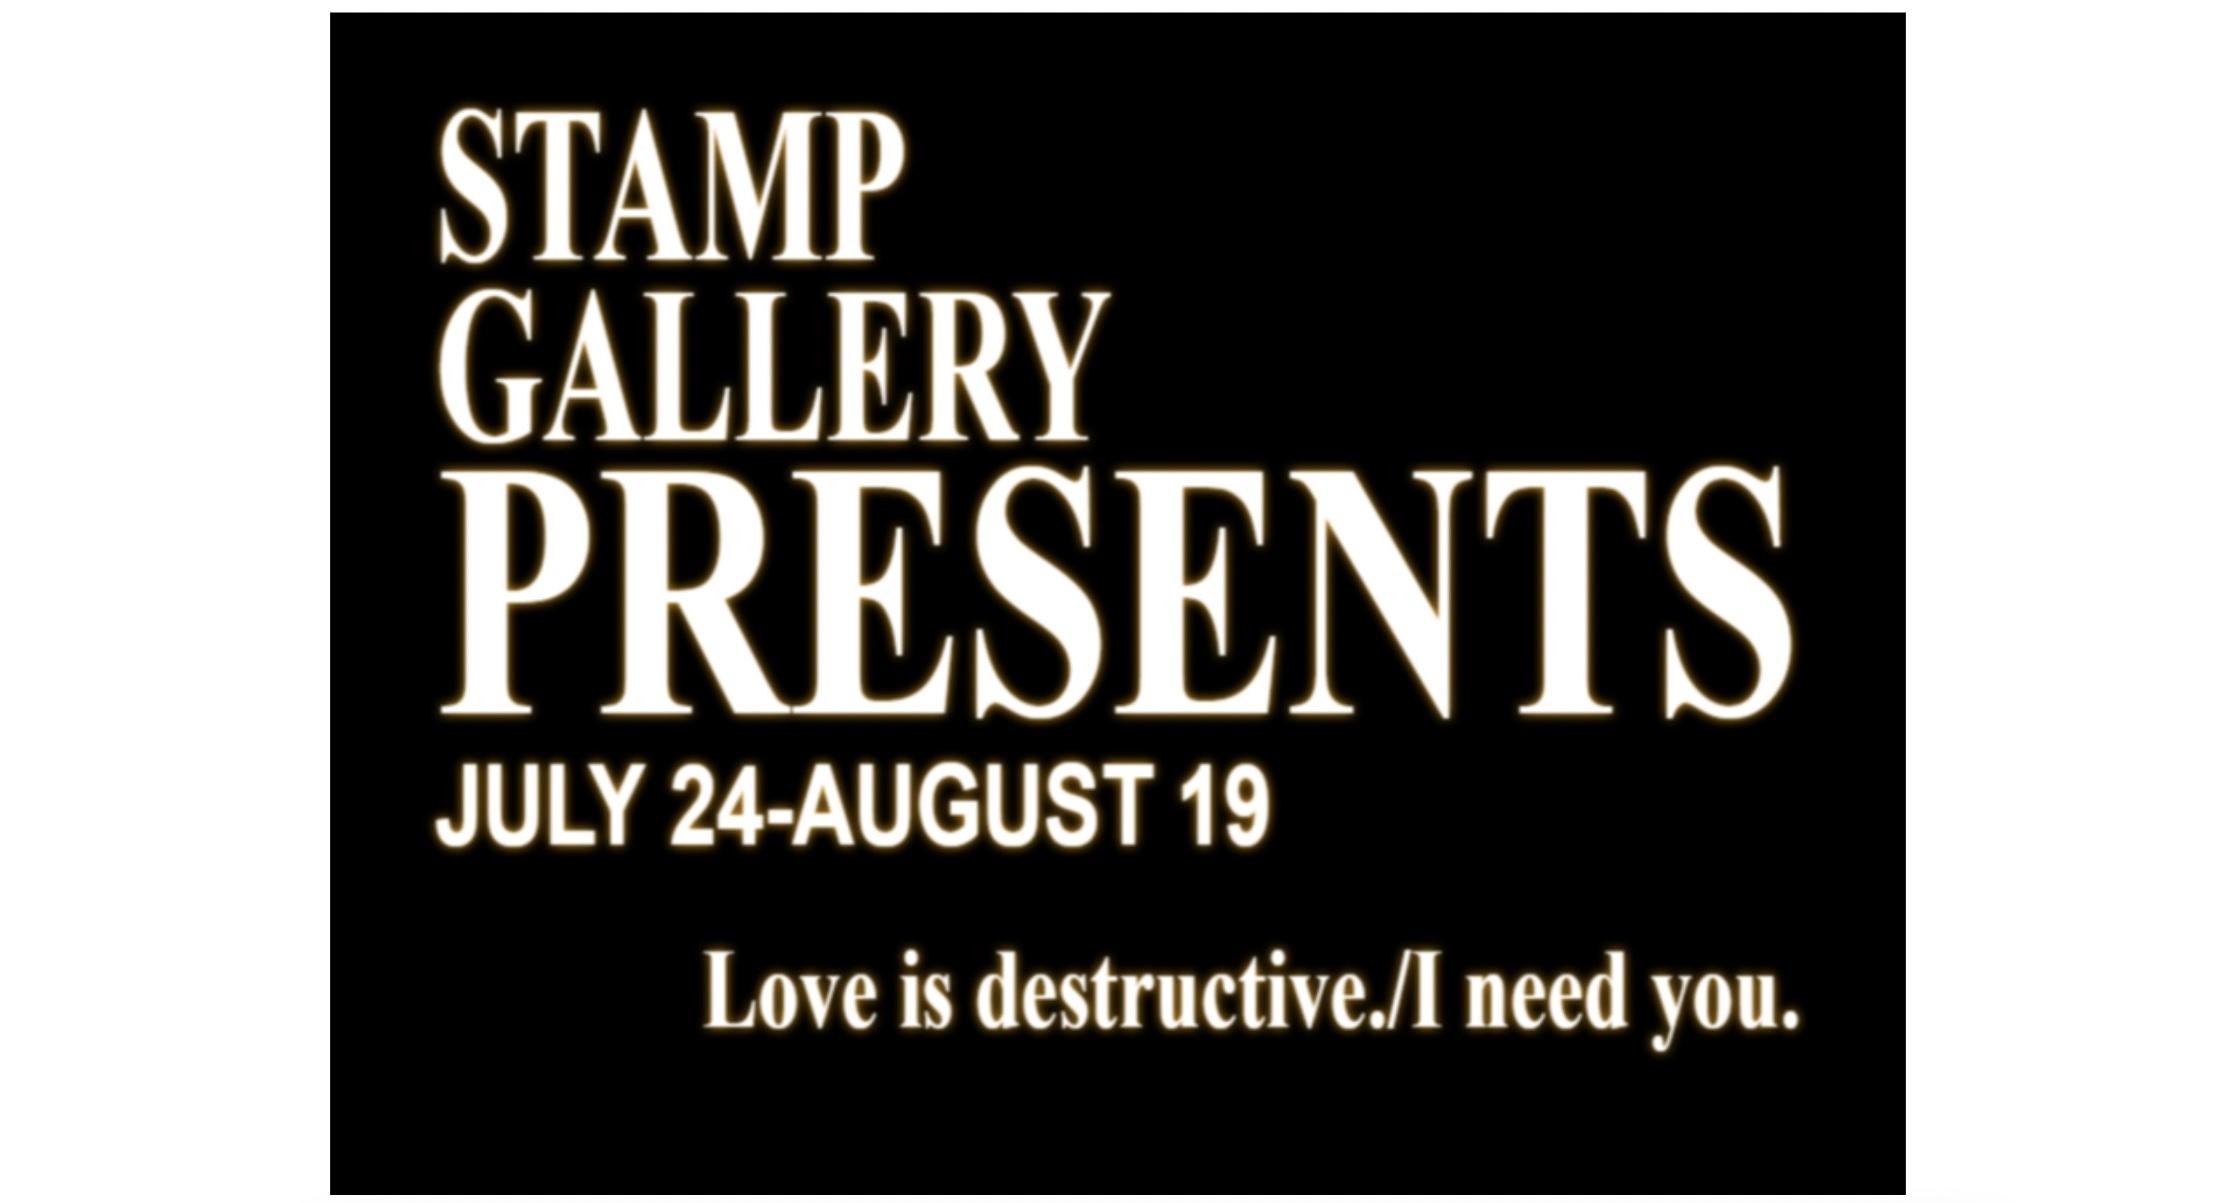 "The Stamp Gallery Presents" in bold letters with the dates "July 24-August 19" below followed by "Love is destructive. I need you."